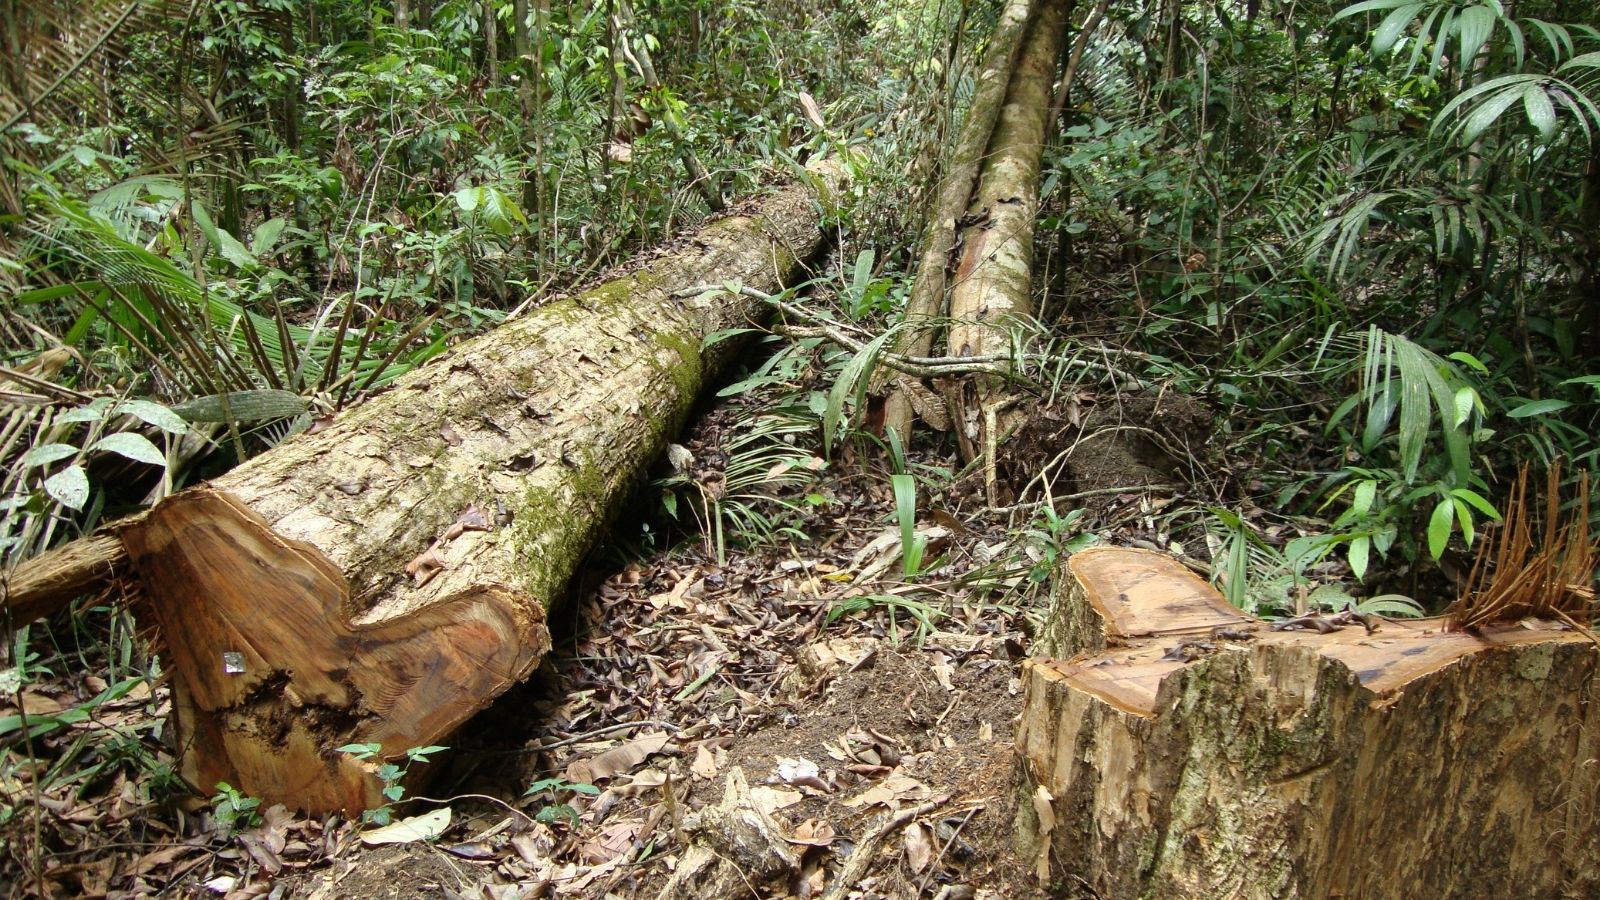 Latin American forests will almost certainly continue to lose ground to agricultural uses even as timber demand increases over the next 80 years, but changing management practices and more robust growth from global warming will help these smaller forests keep pace with today's larger versions as repositories of climate-warming carbon, according to new research from Georgia Tech's School of Public Policy.